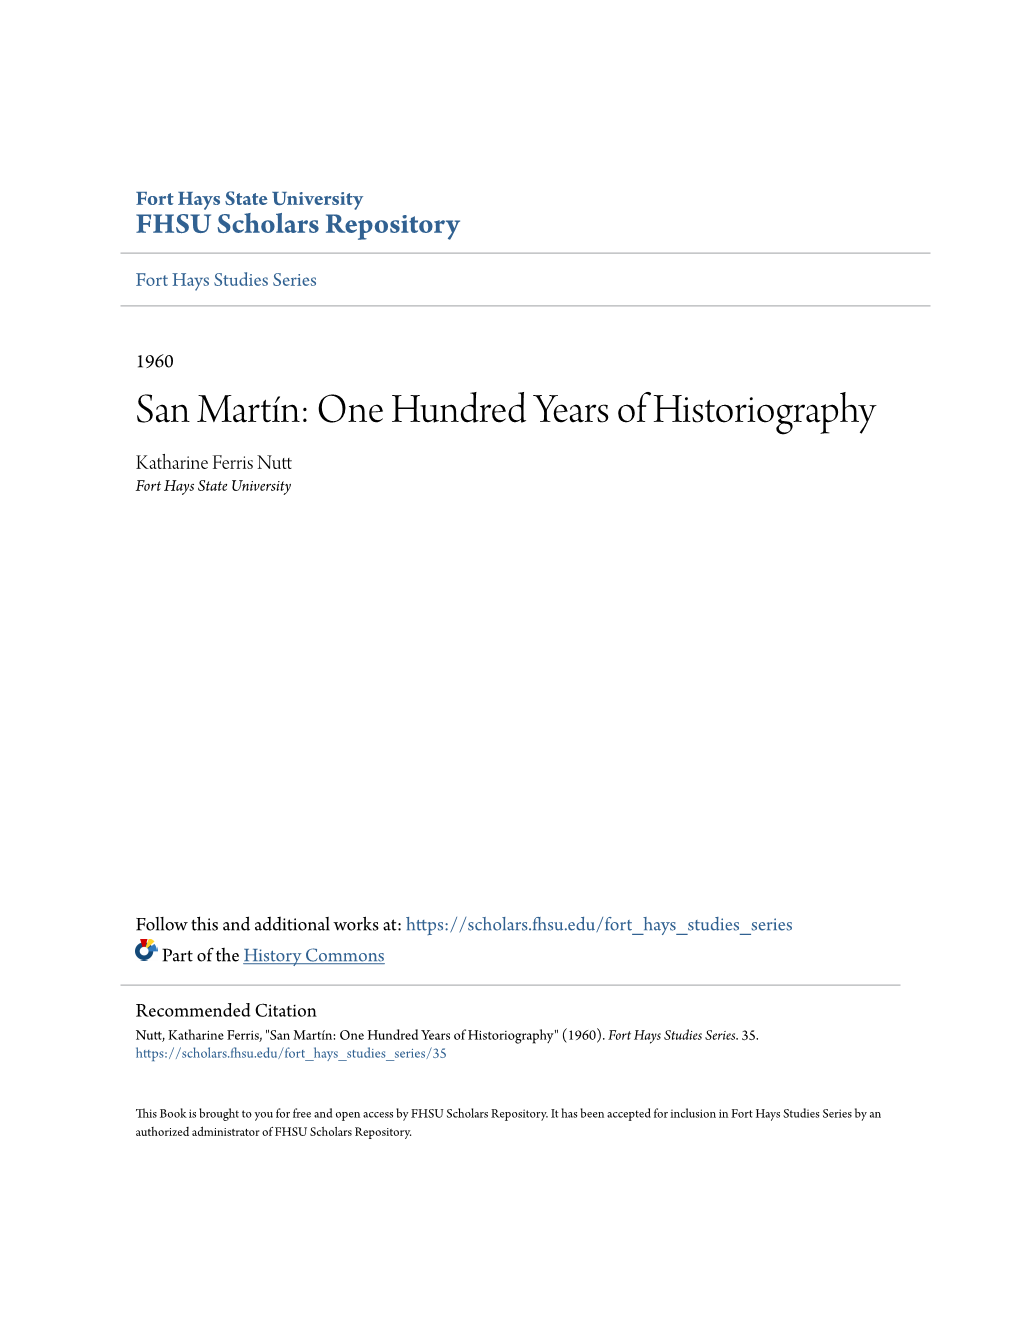 San Martín: One Hundred Years of Historiography Katharine Ferris Nutt Fort Hays State University